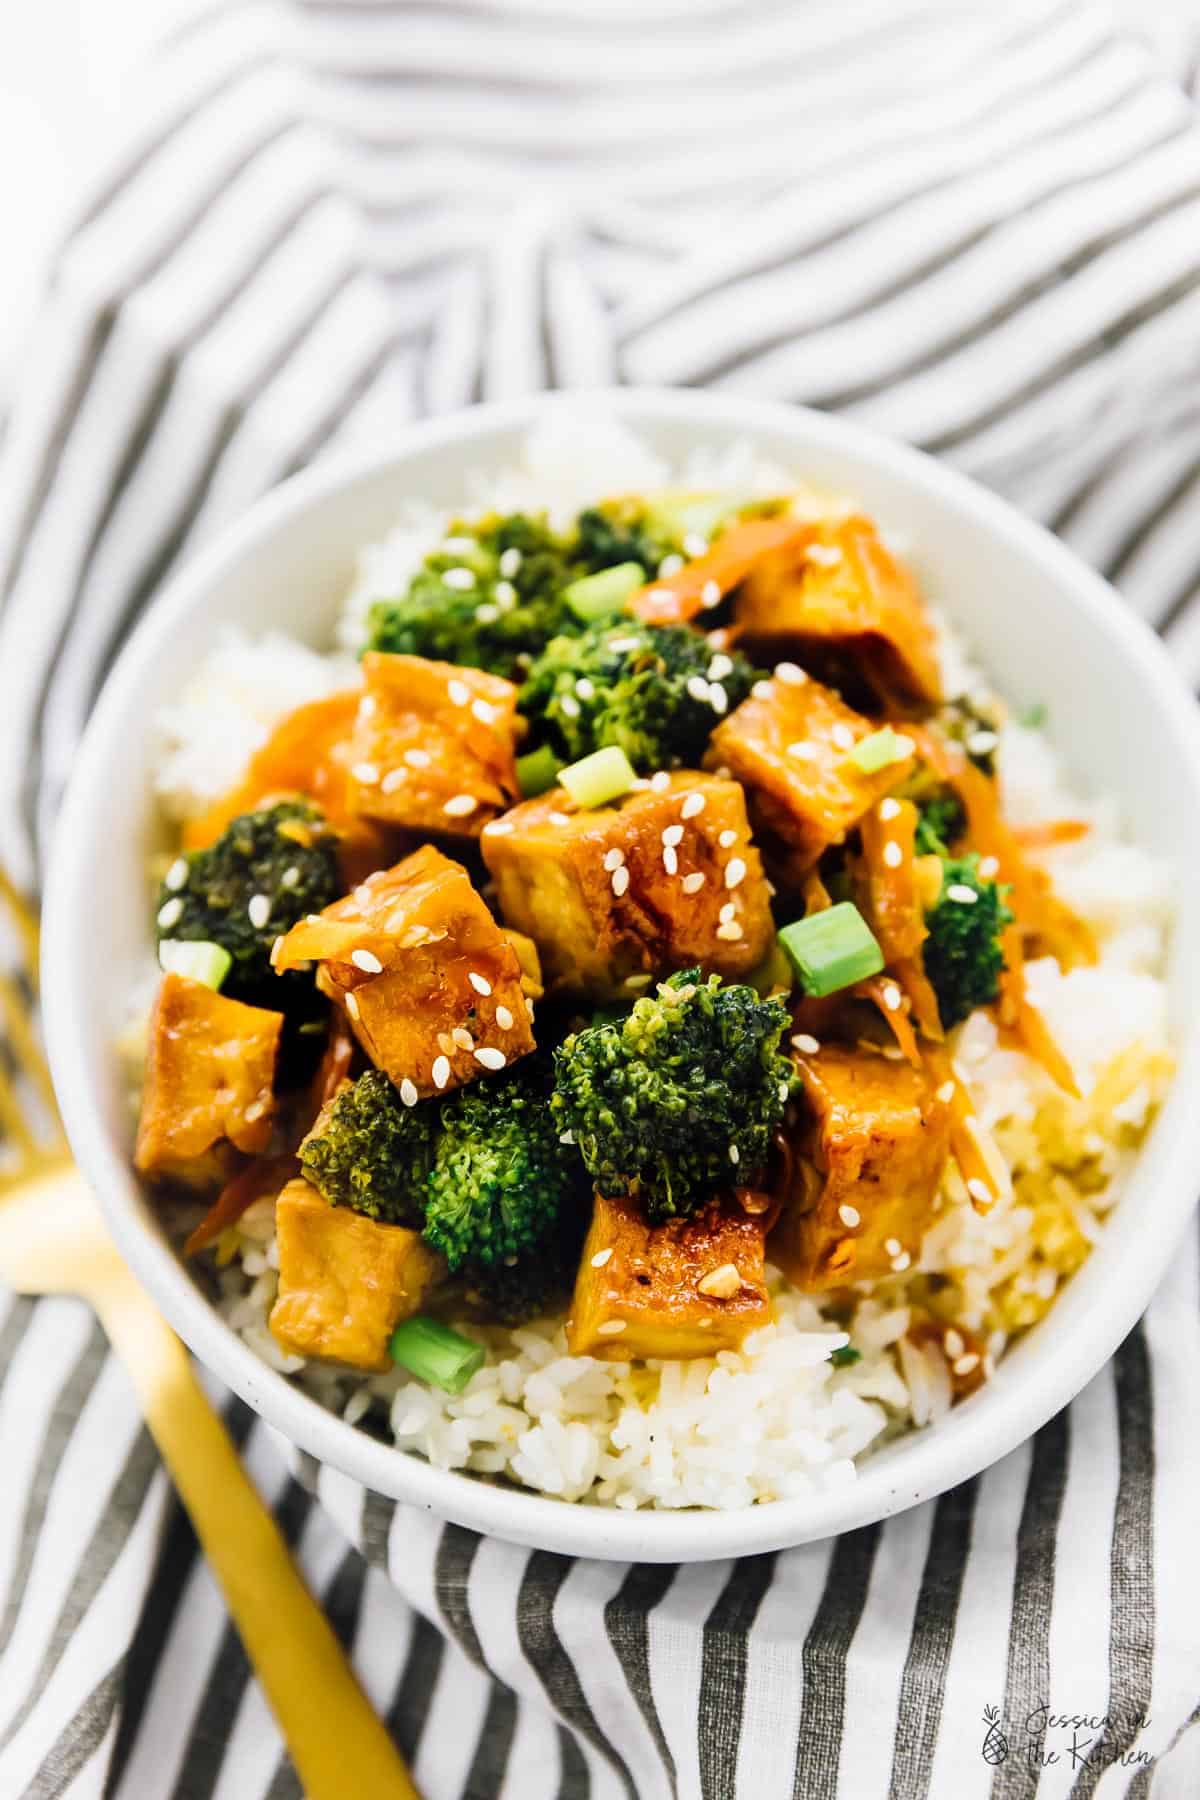 Tofu and broccoli on a bed of rice.